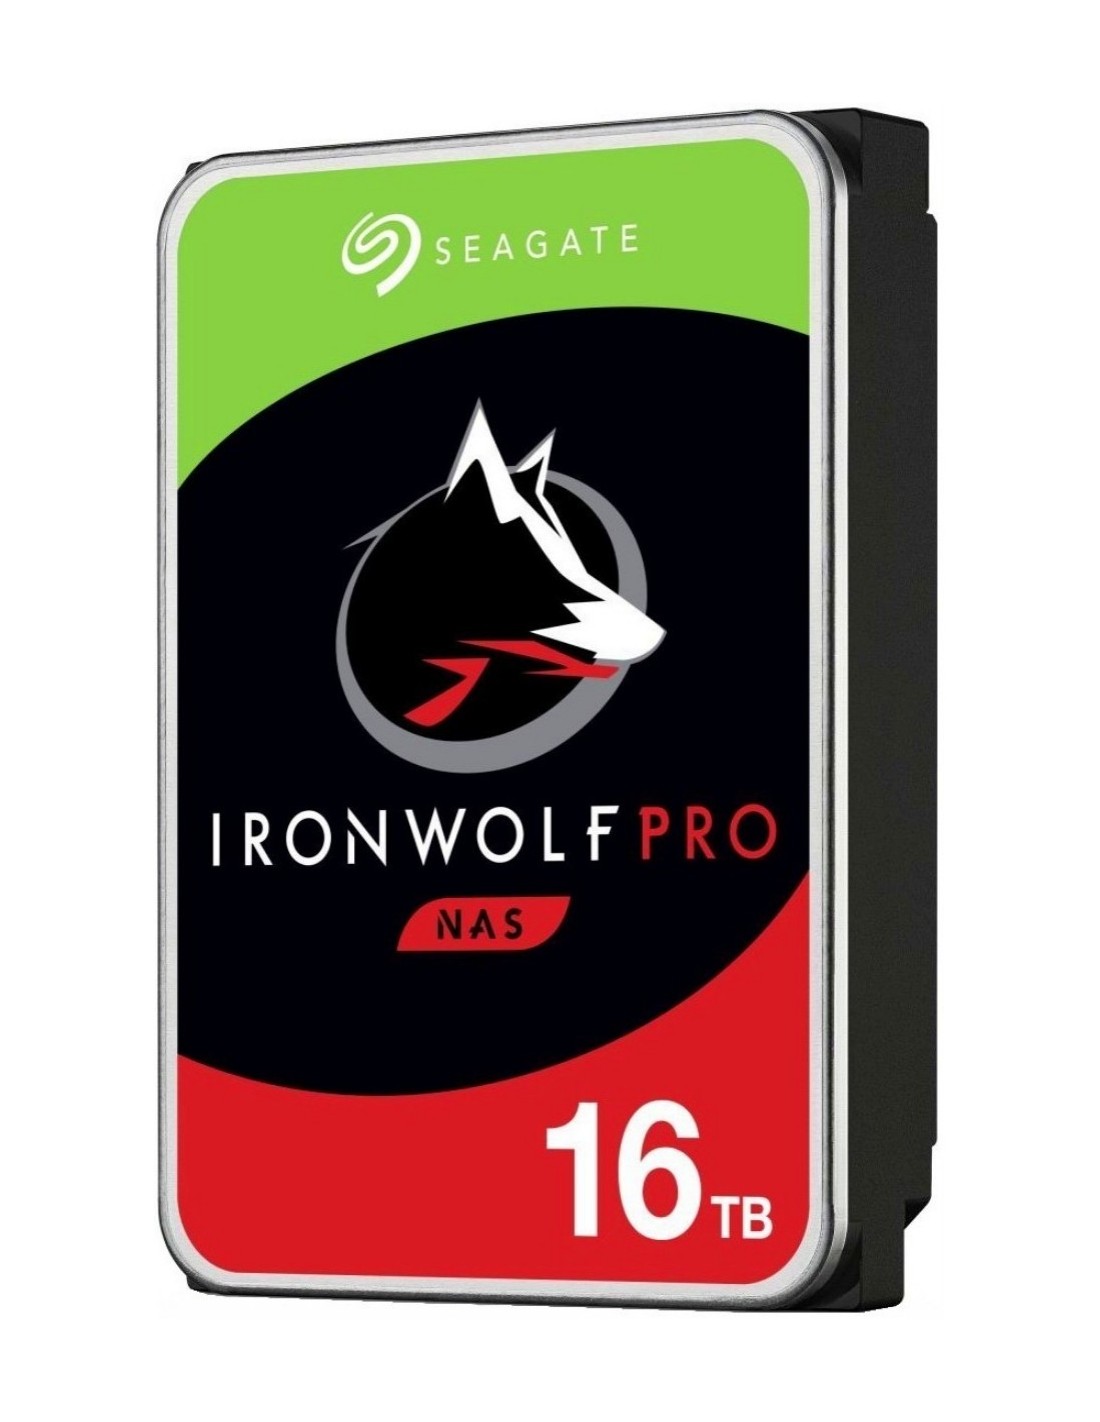 Seagate ST16000NT001 16TB Hard Drive 3.5" IRONWOLF PRO NAS 7200RPM 256MB Edition